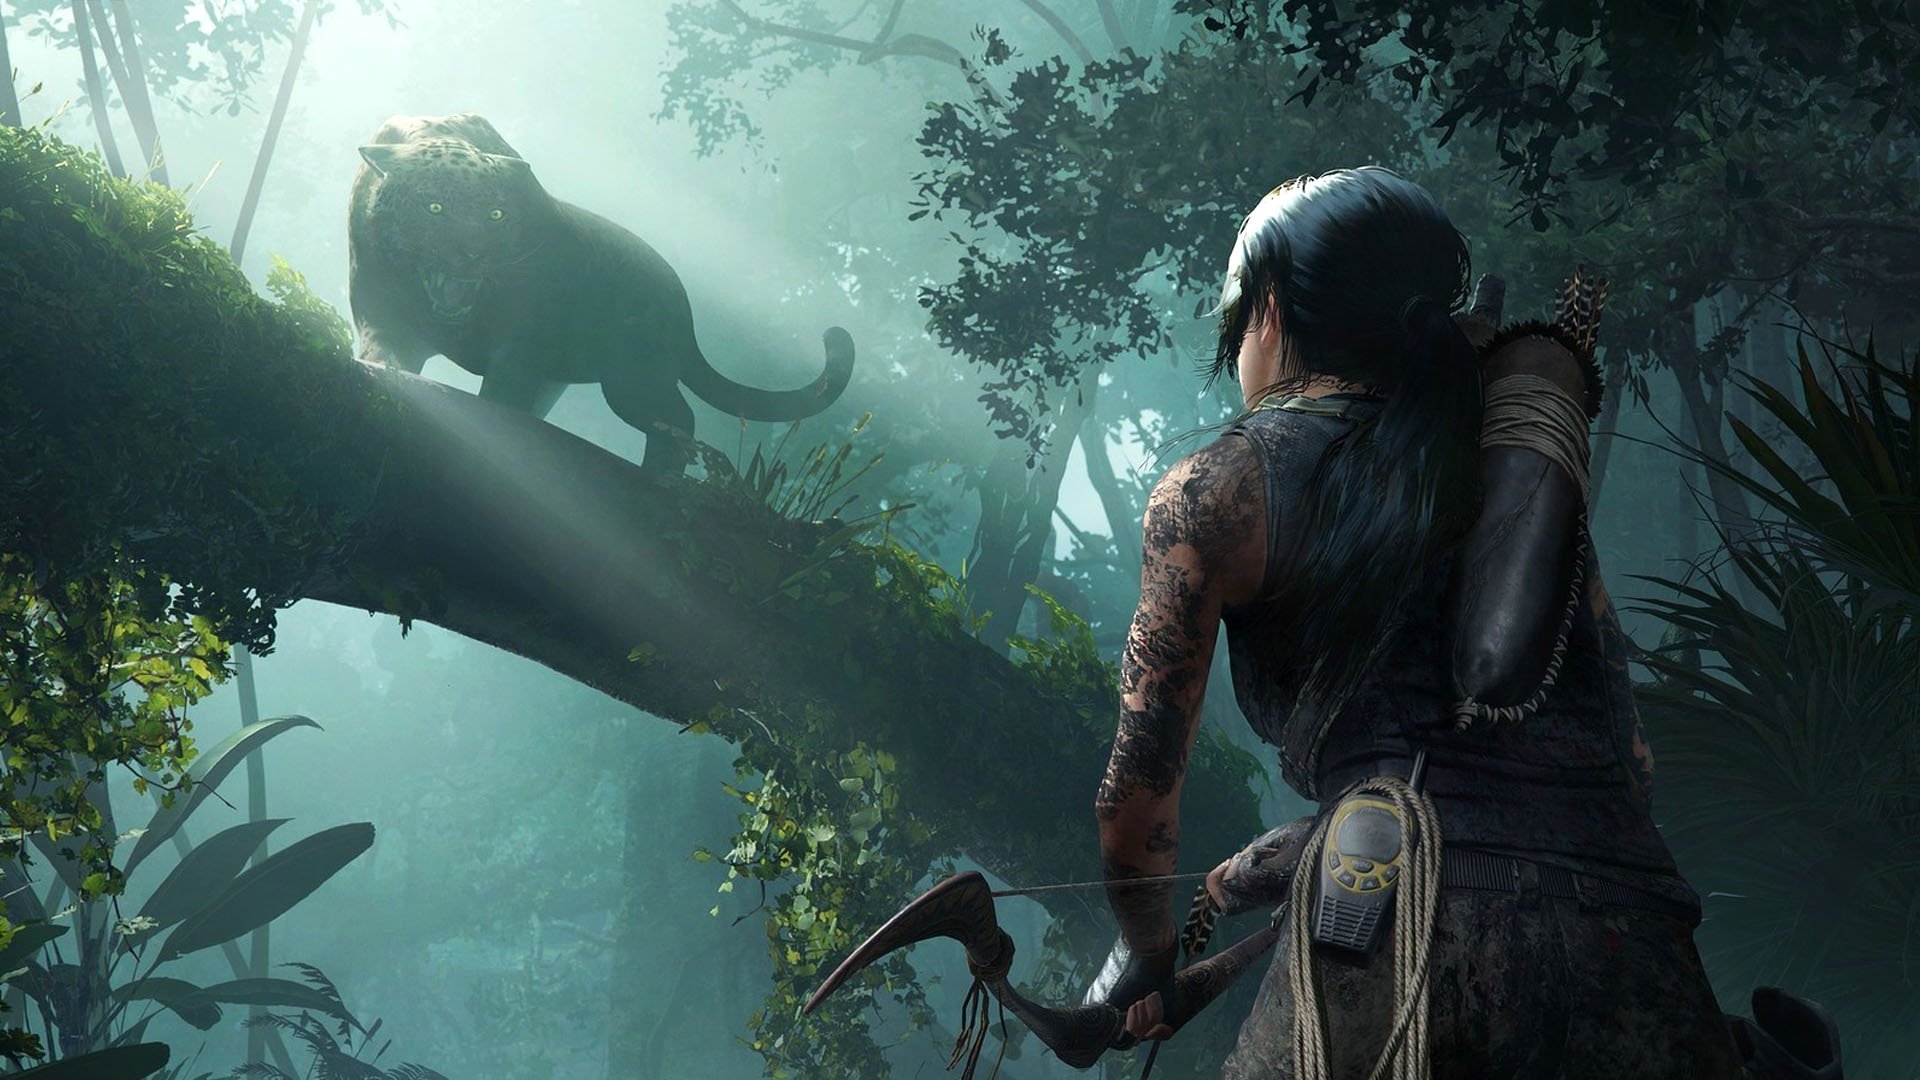 Looks like Shadow of the Tomb Raider is getting a Definitive Edition